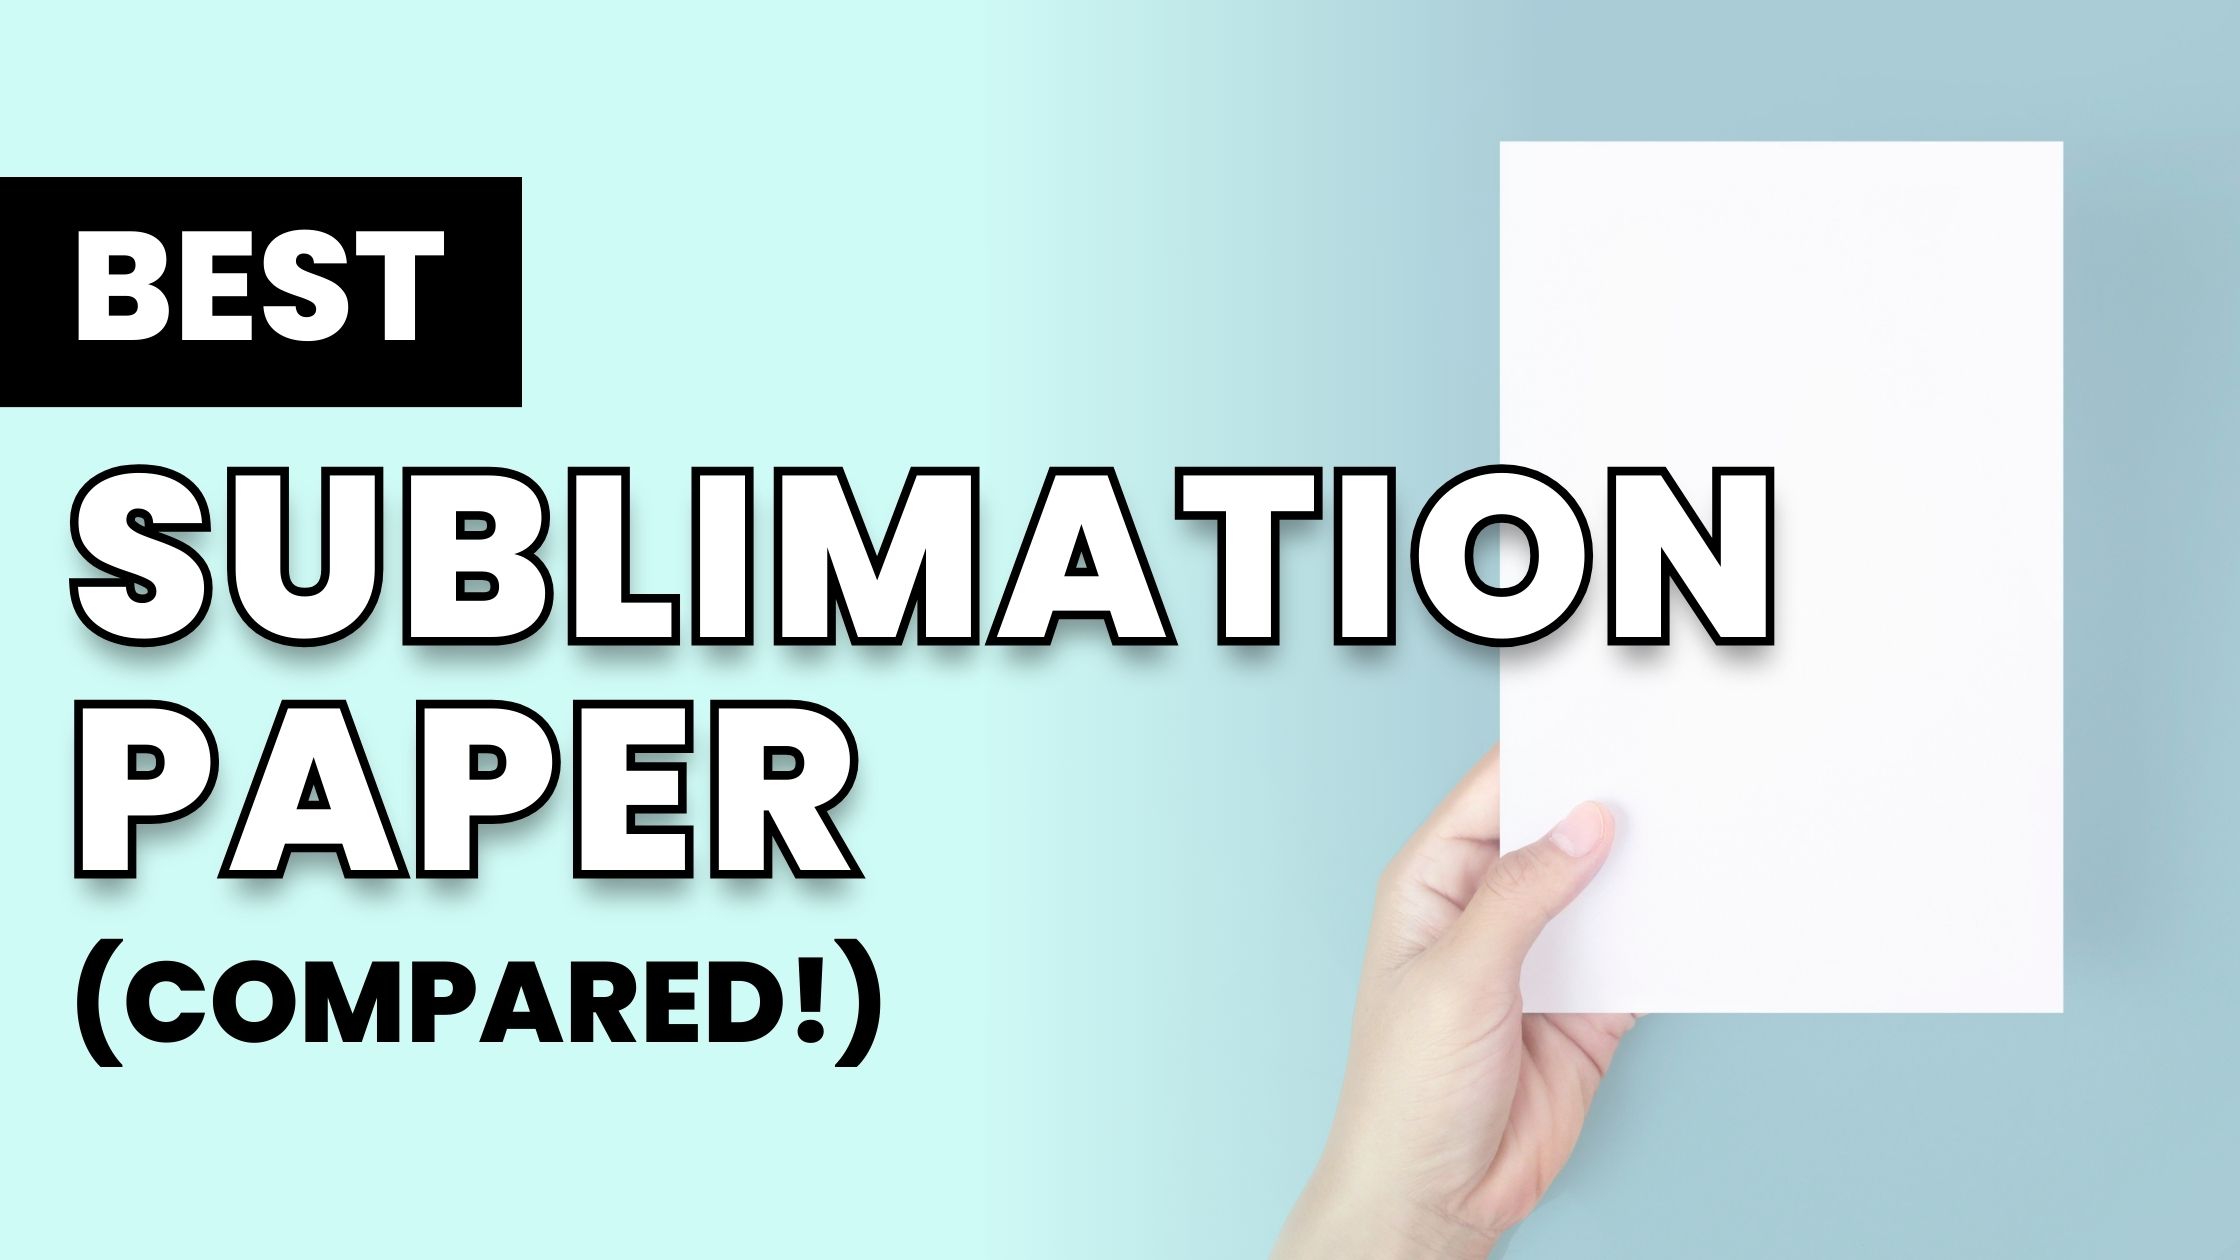 Hiipoo Sublimation Ink and Paper Review! Is It Good? 